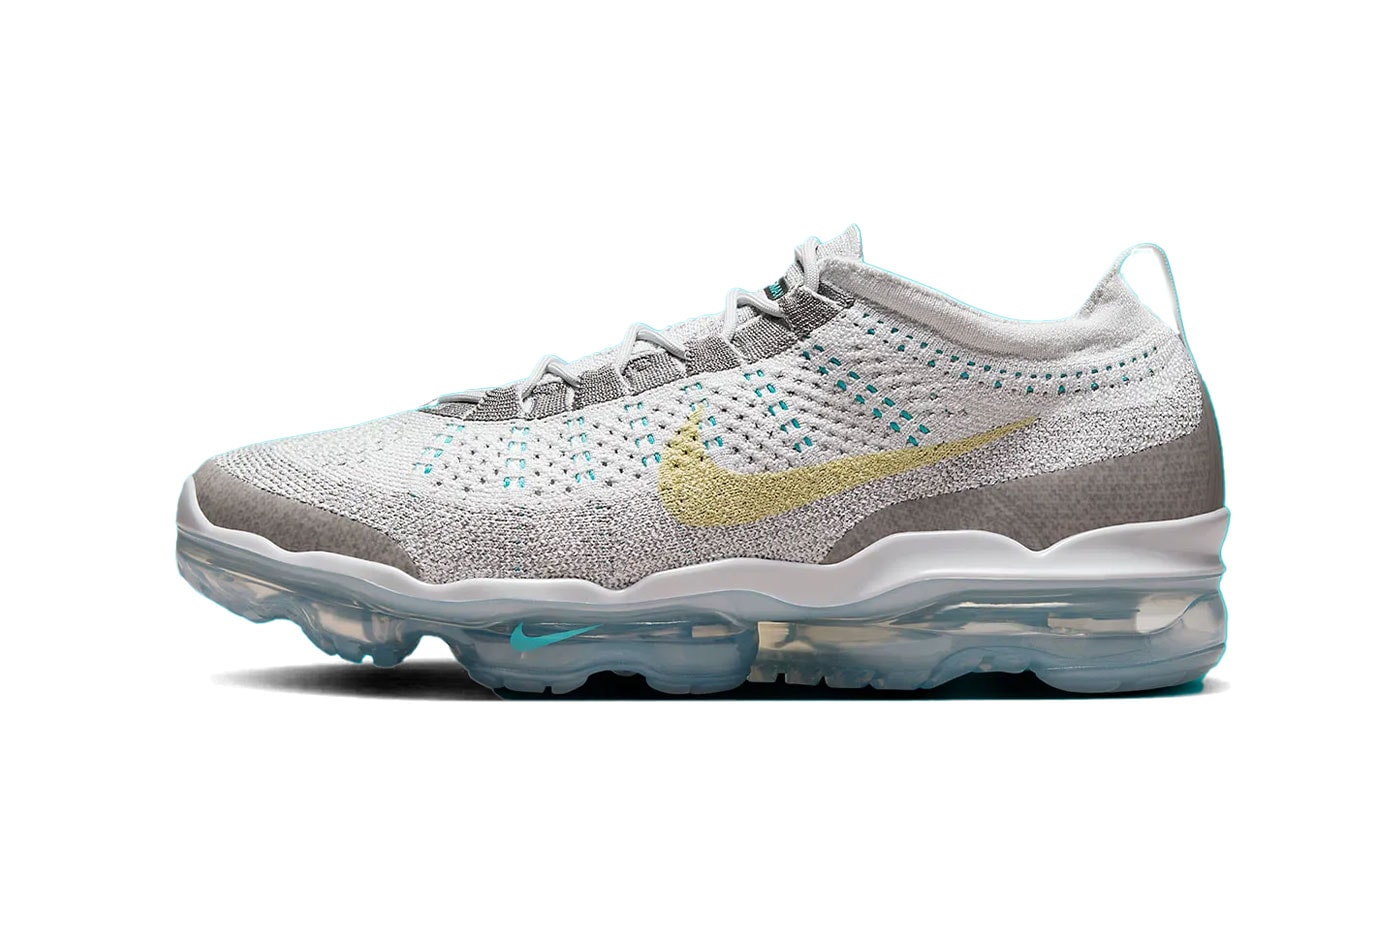 Nike Vapormax Flyknit 2023 Dusty Cactus Light Grey Release Info DV1678-011 sneaker running shoes swoosh semi translucent outsole air 